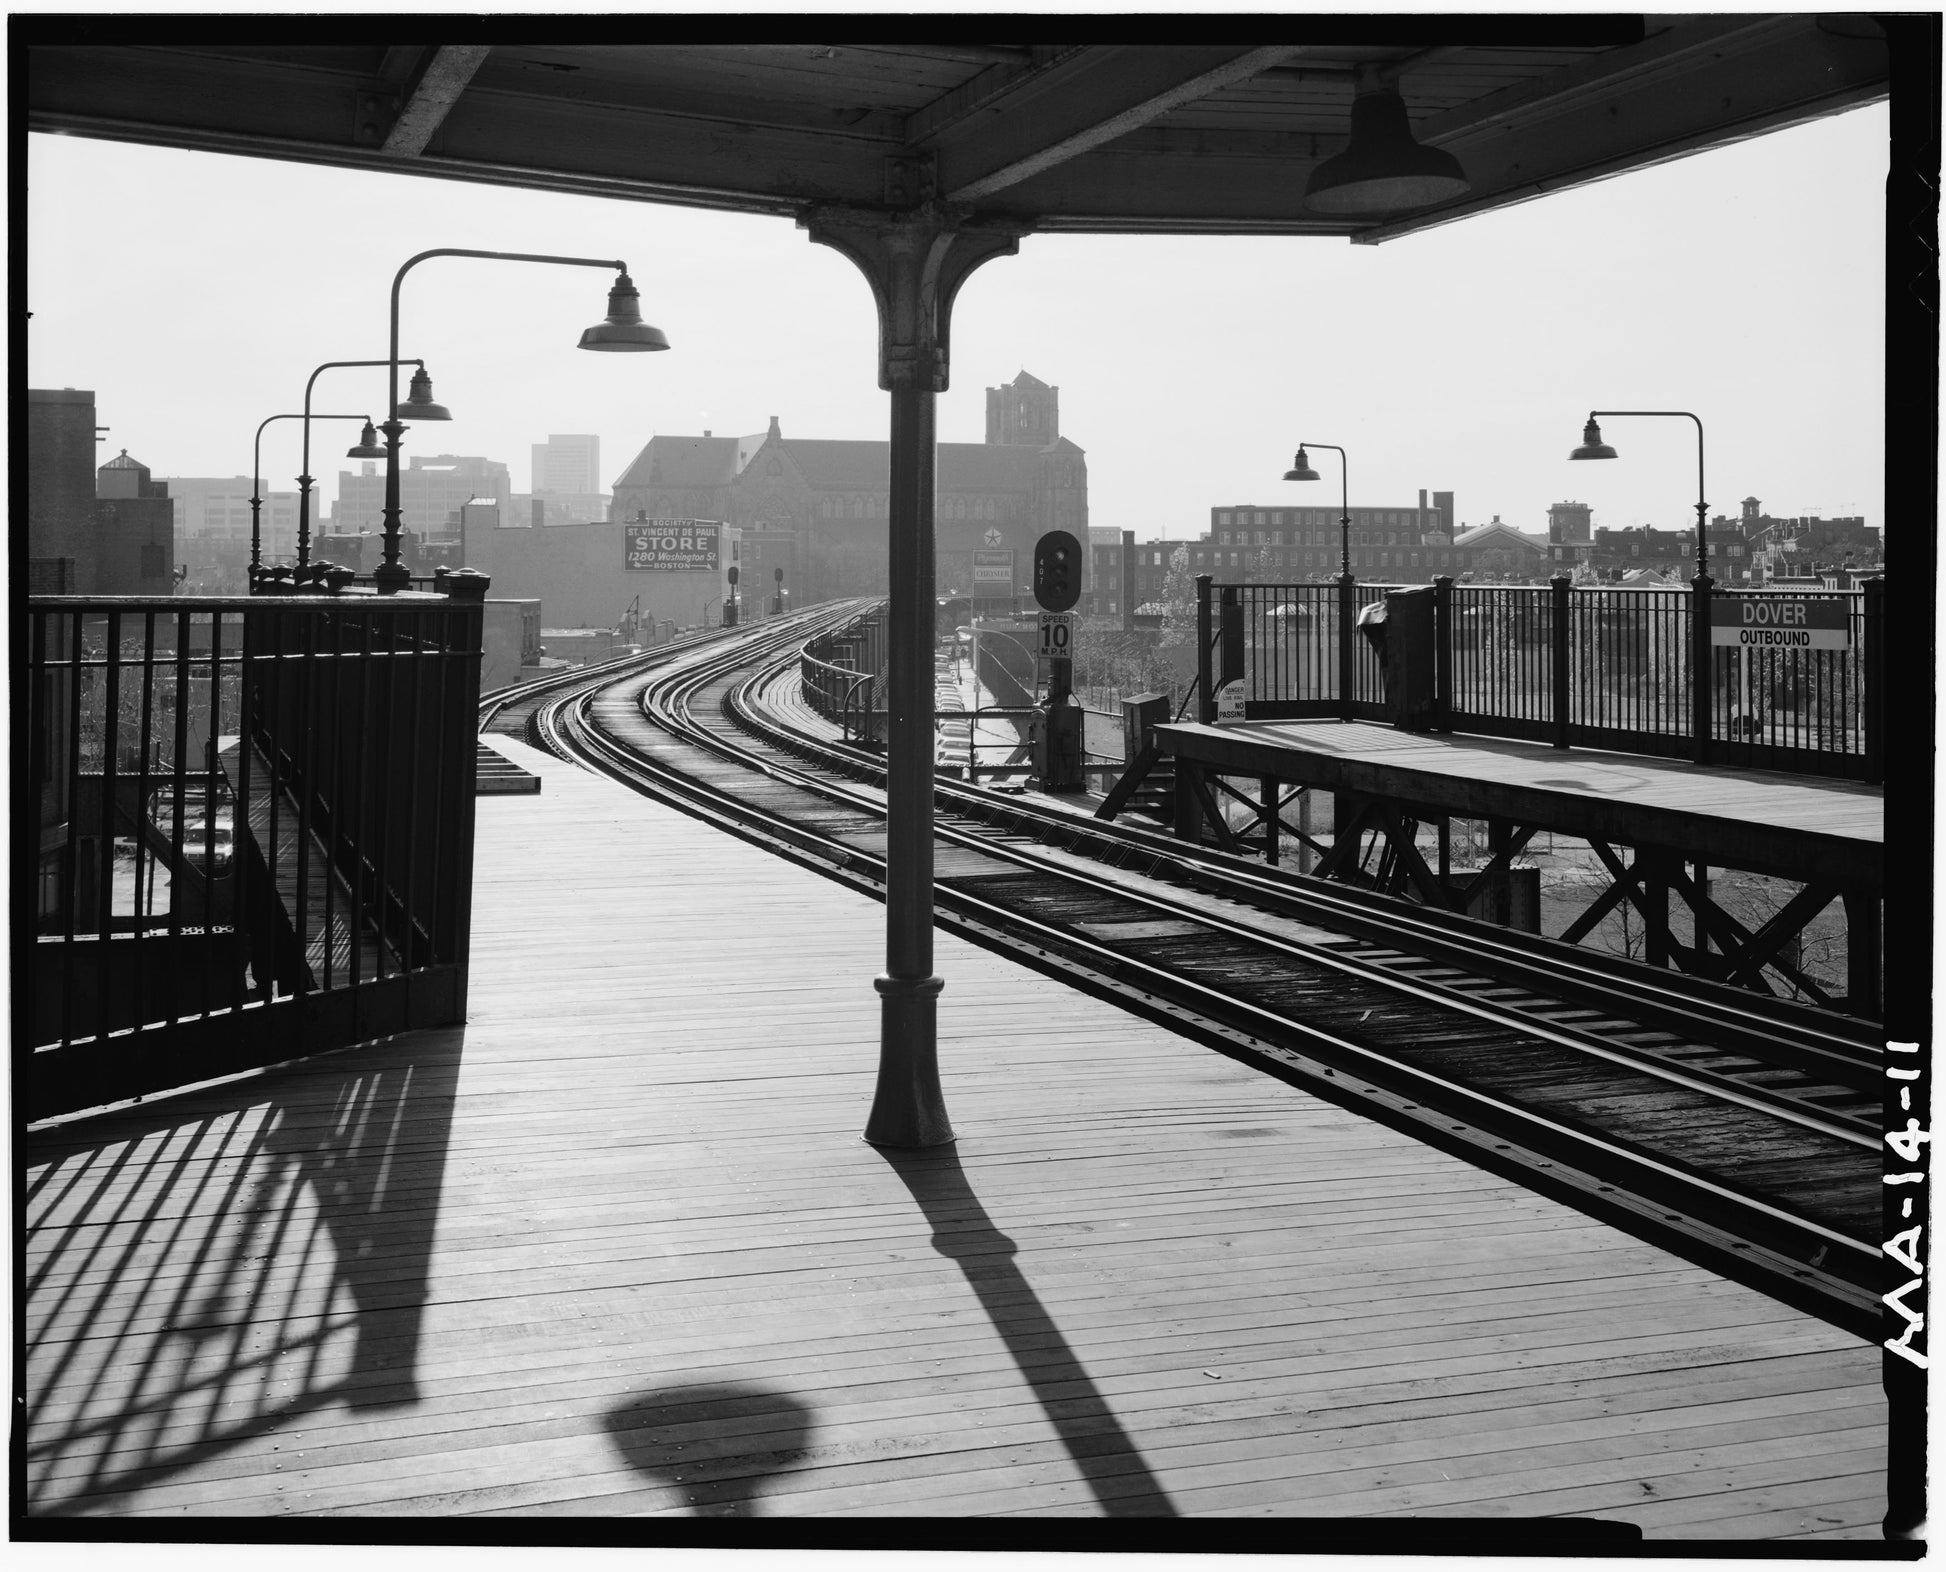 Vintage Photo: Dover Street Station Looking South